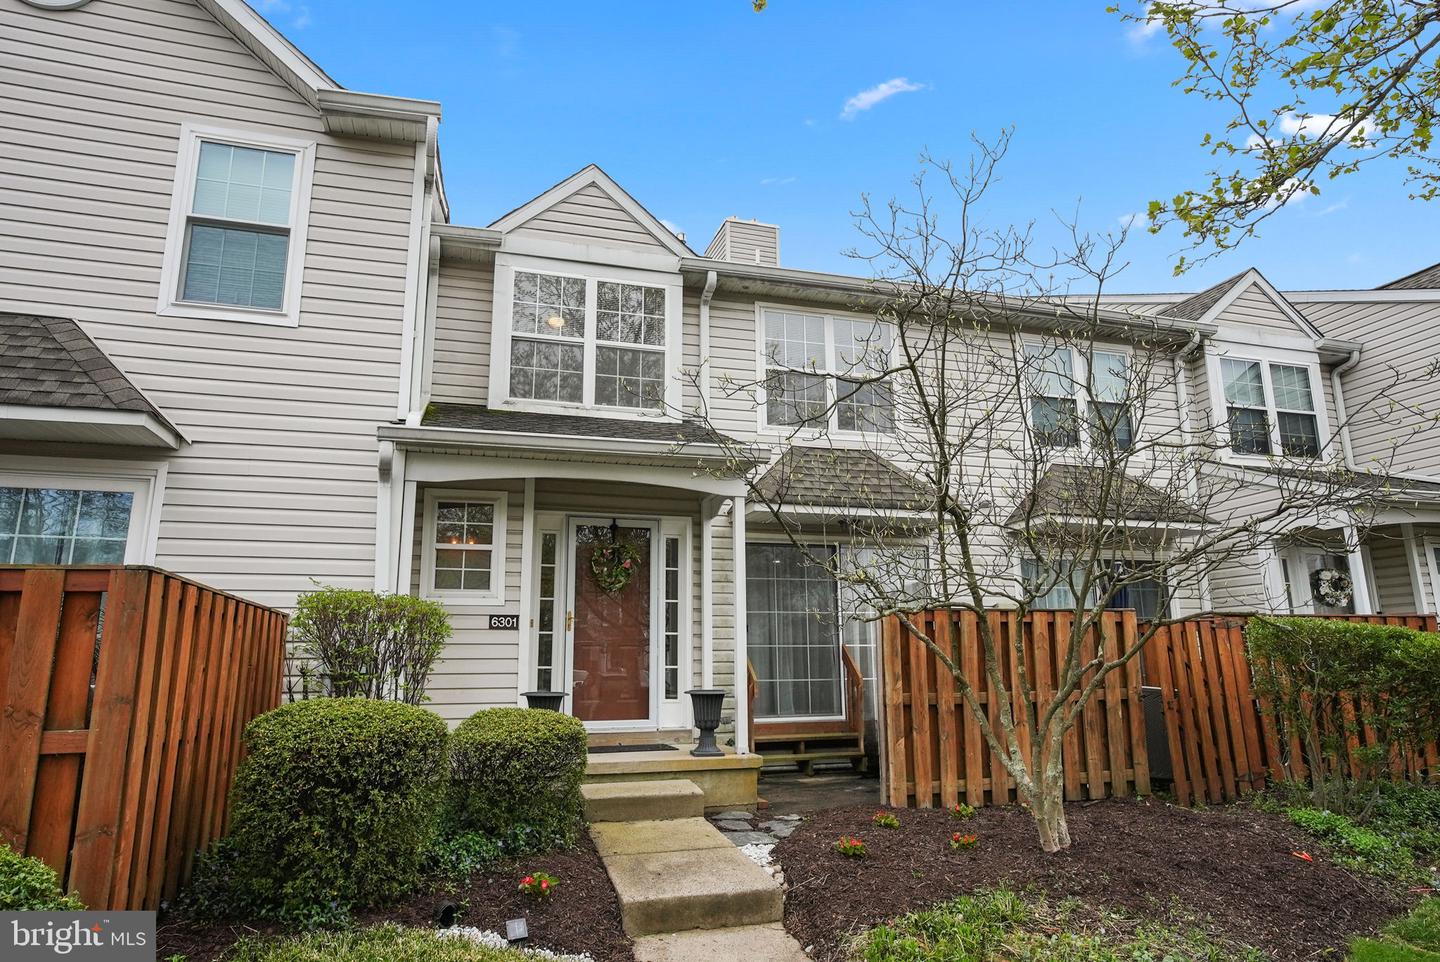 View Yardley, PA 19067 townhome